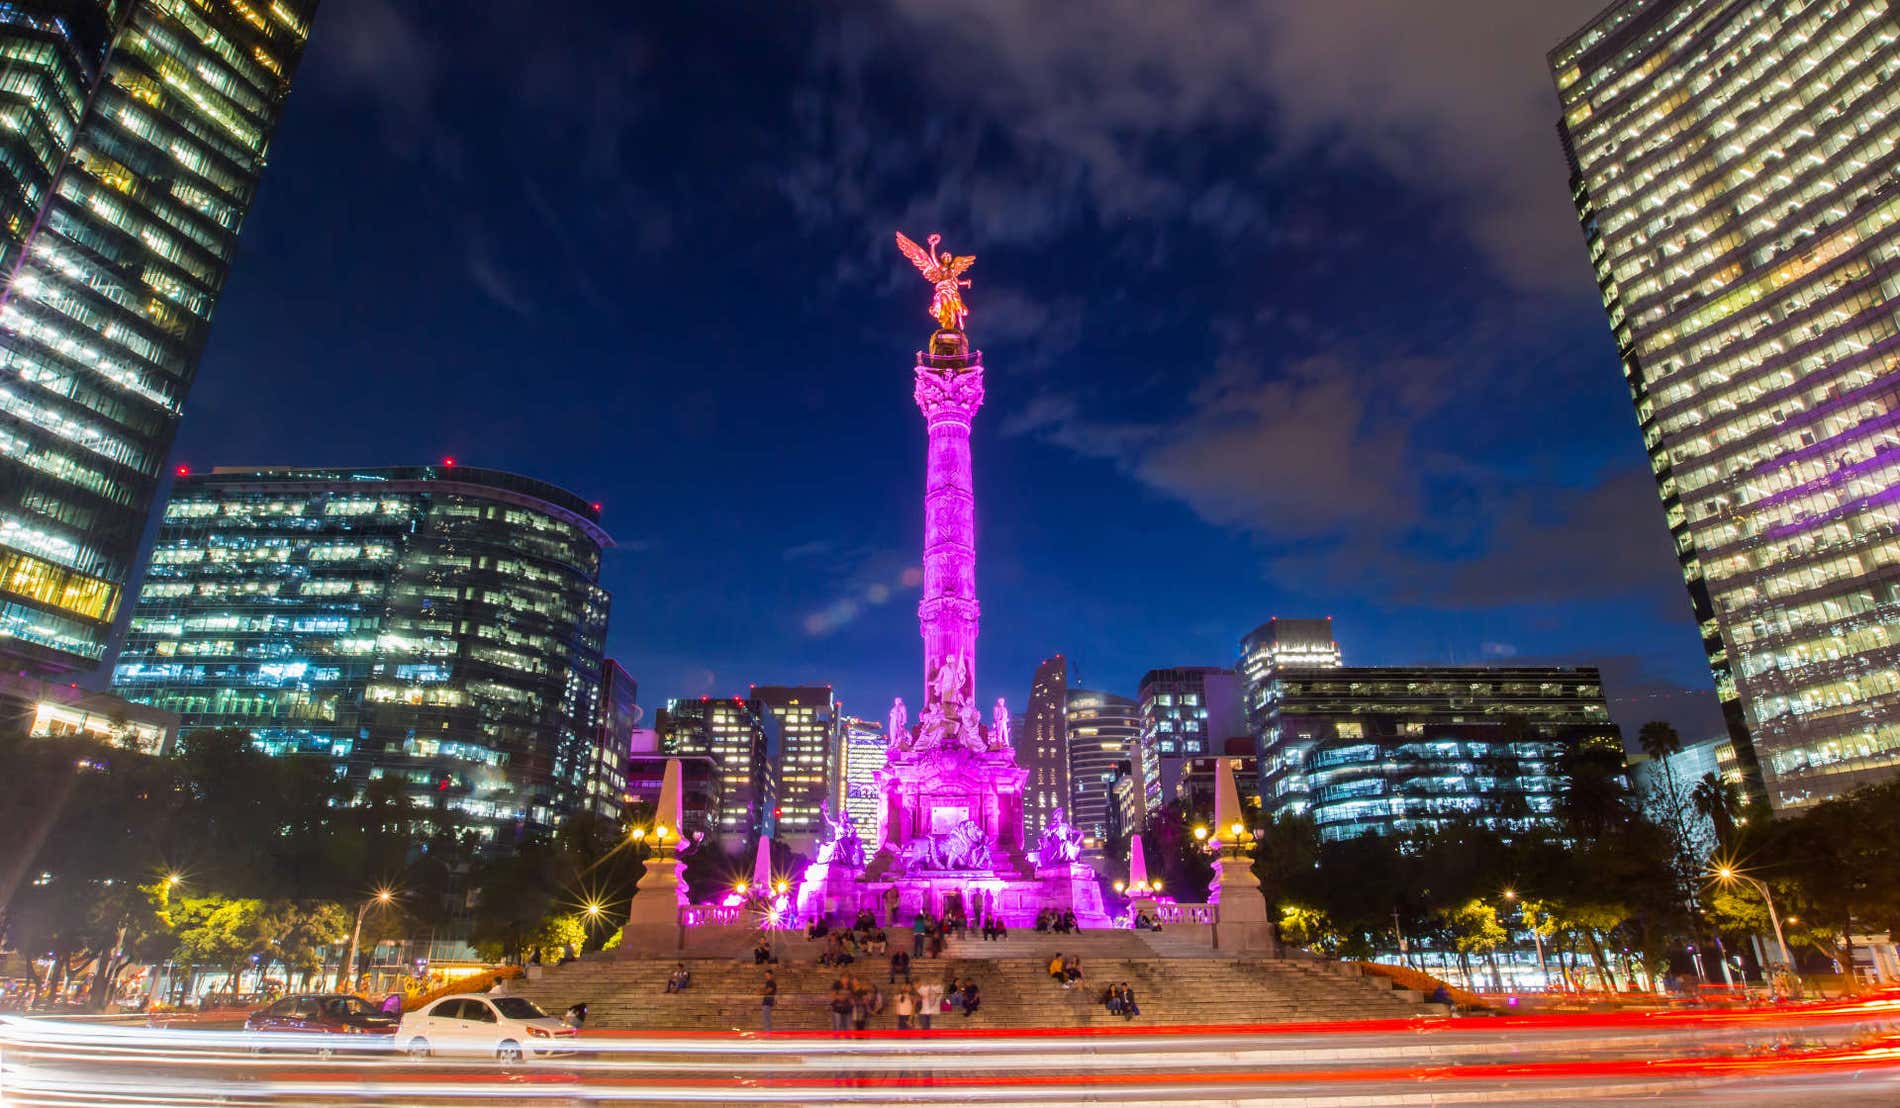 Mexico City Art Guide: Must-See Museums, Galleries, Street Art and More –